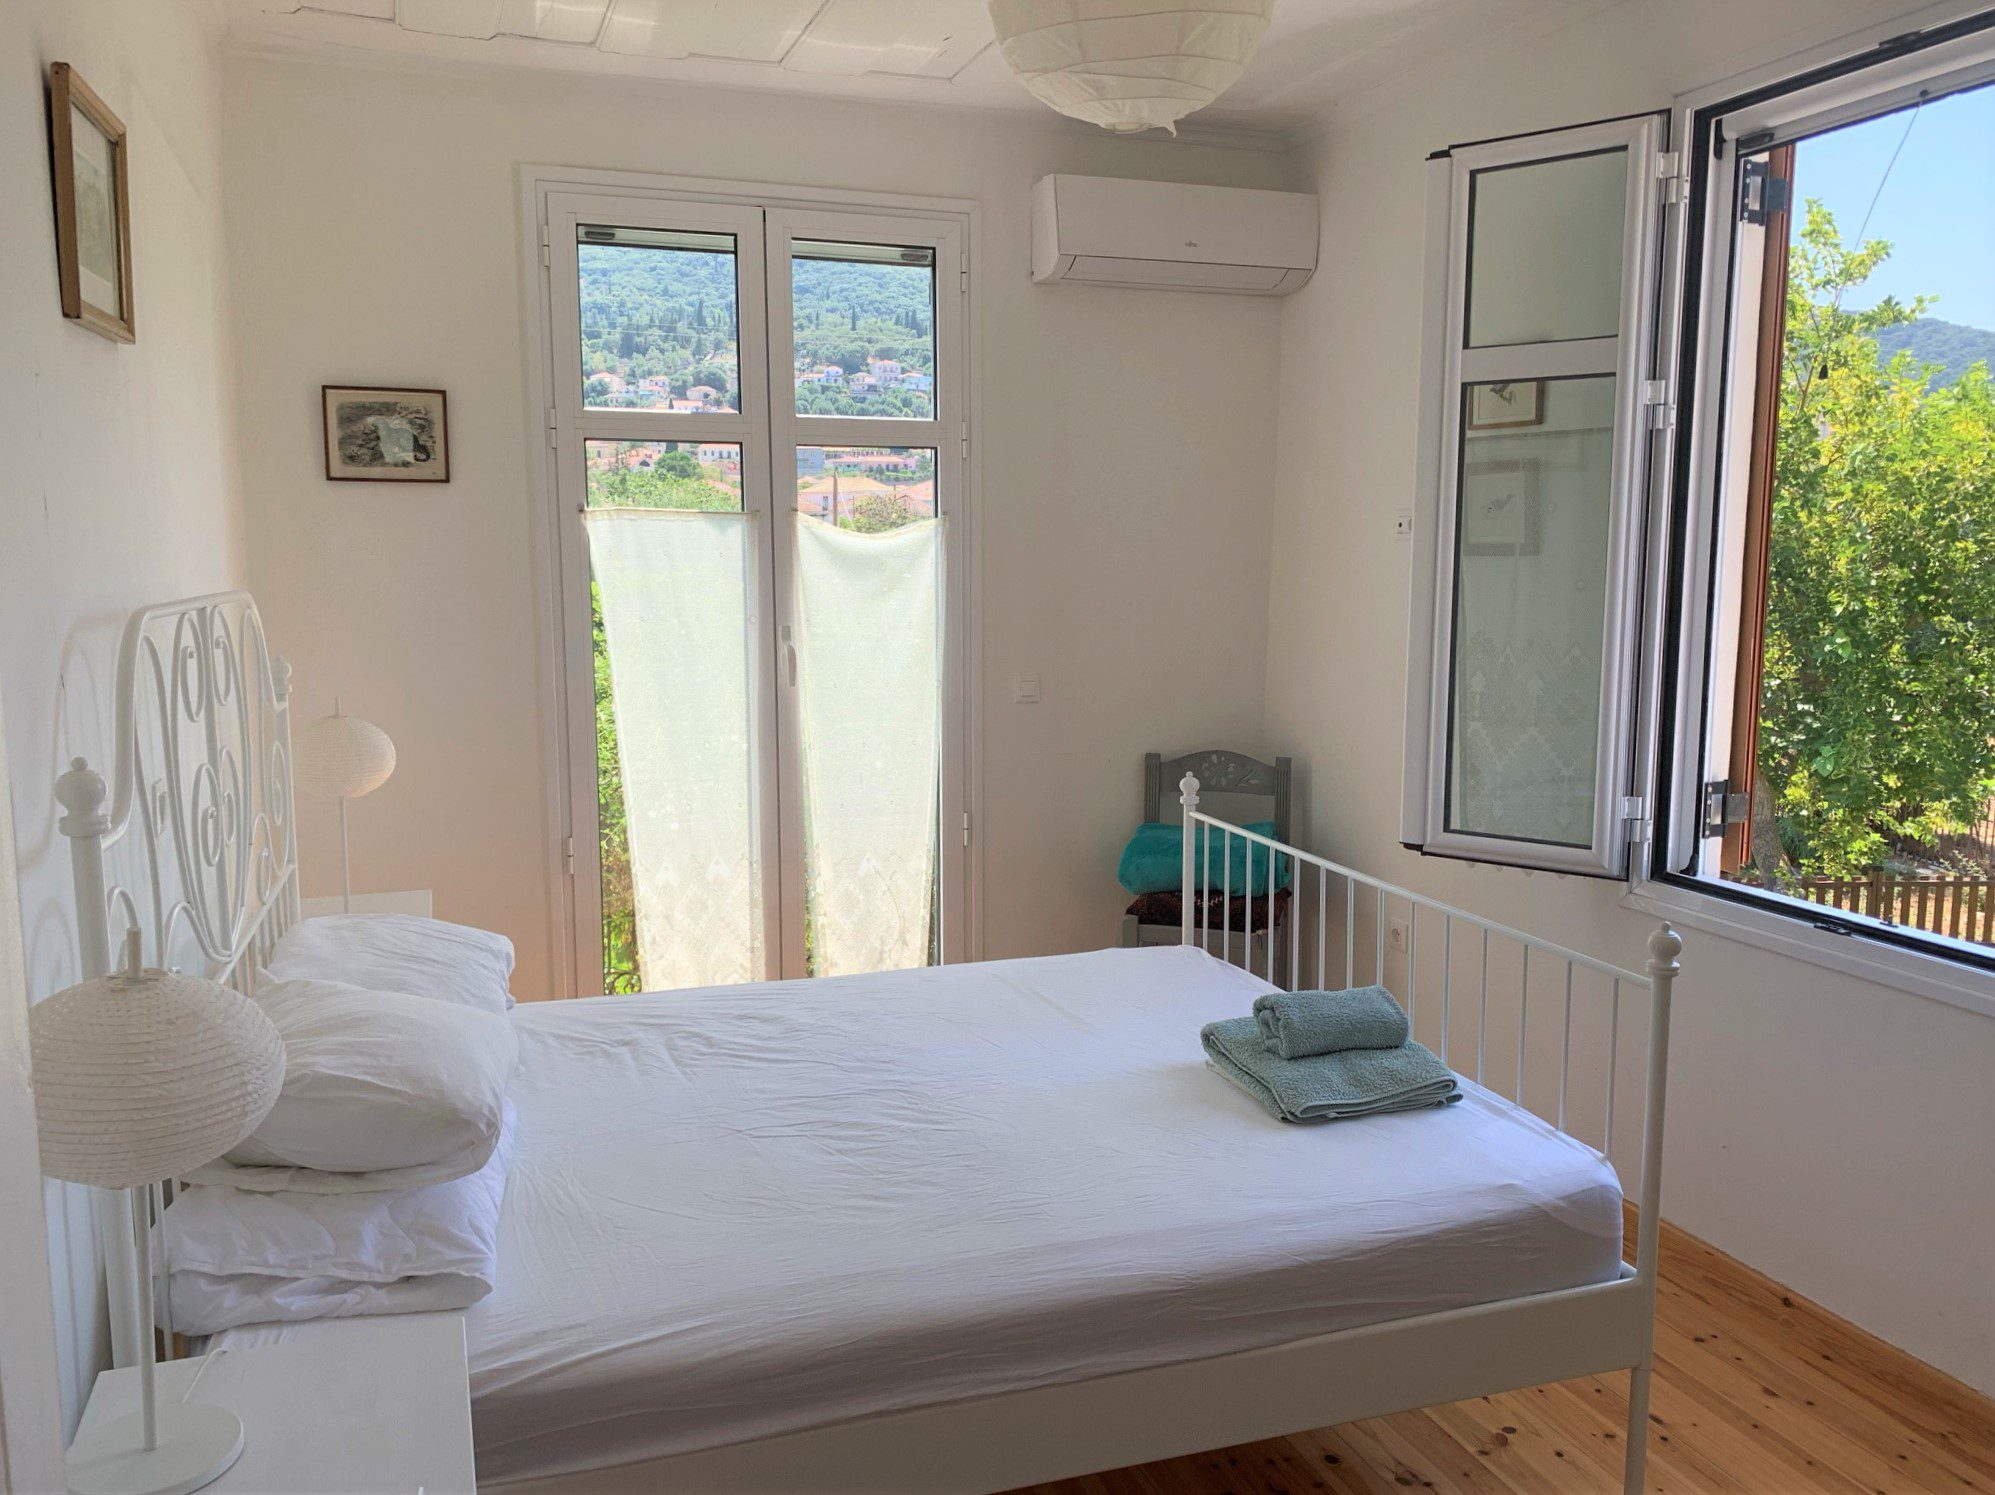 Bedroom of house for rent in Ithaca Greece, Vathi